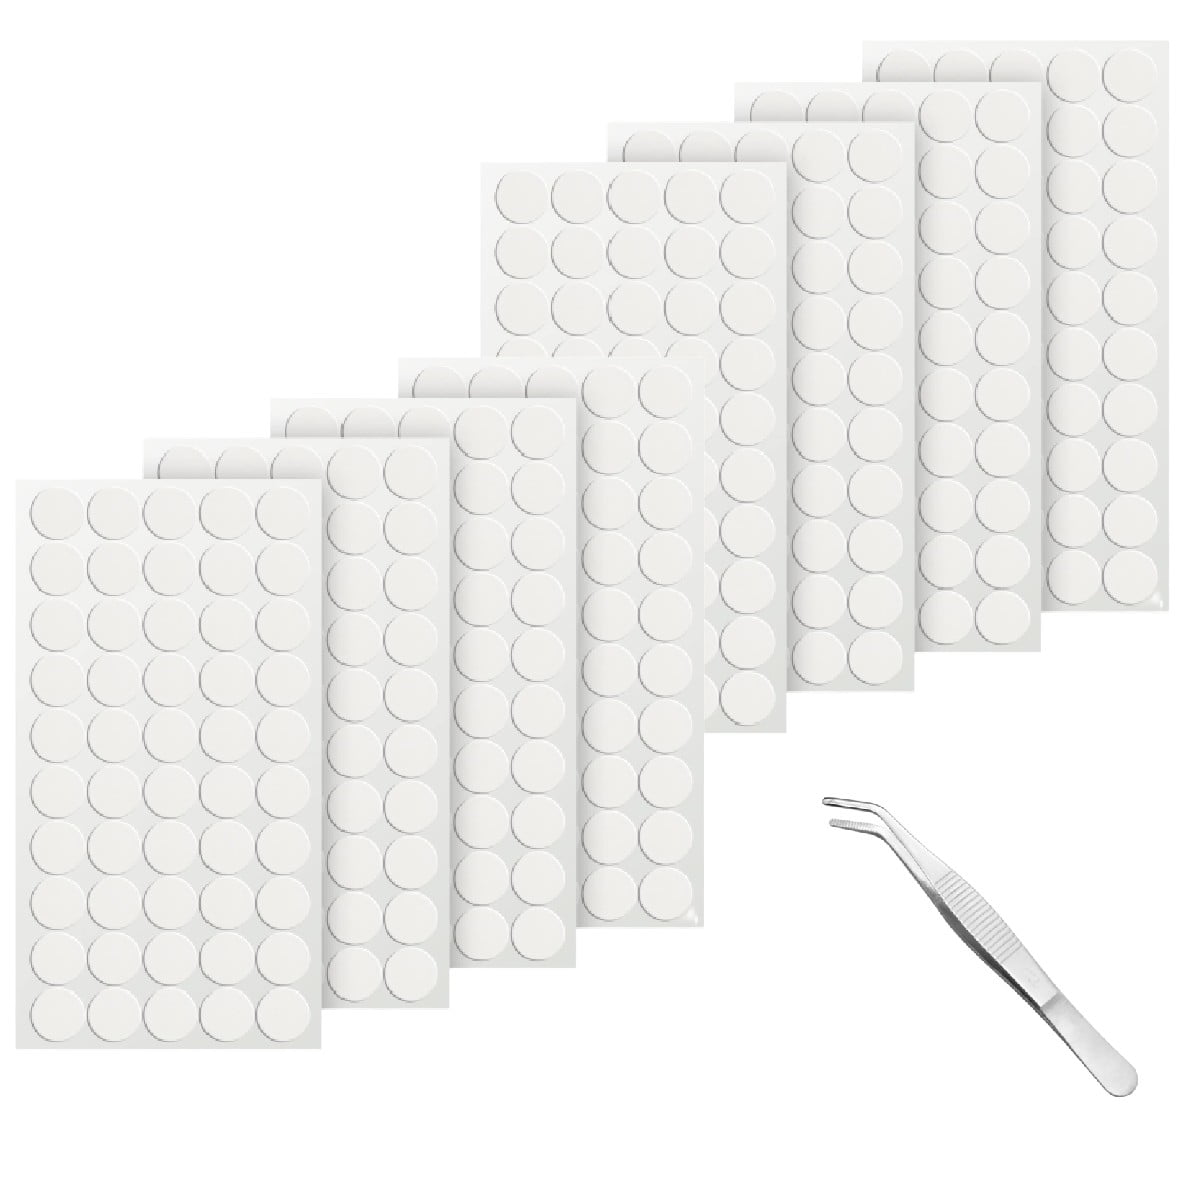  Kuchoow Sticky Tack, Clear Square Poster Putty, Mounting Putty  Removable, 60Pcs Glue Dots Double Sided, Washable Sticky Dots, Sticky Tack  for Wall Hanging, Sticky Putty, Double Sided Sticky Dots 